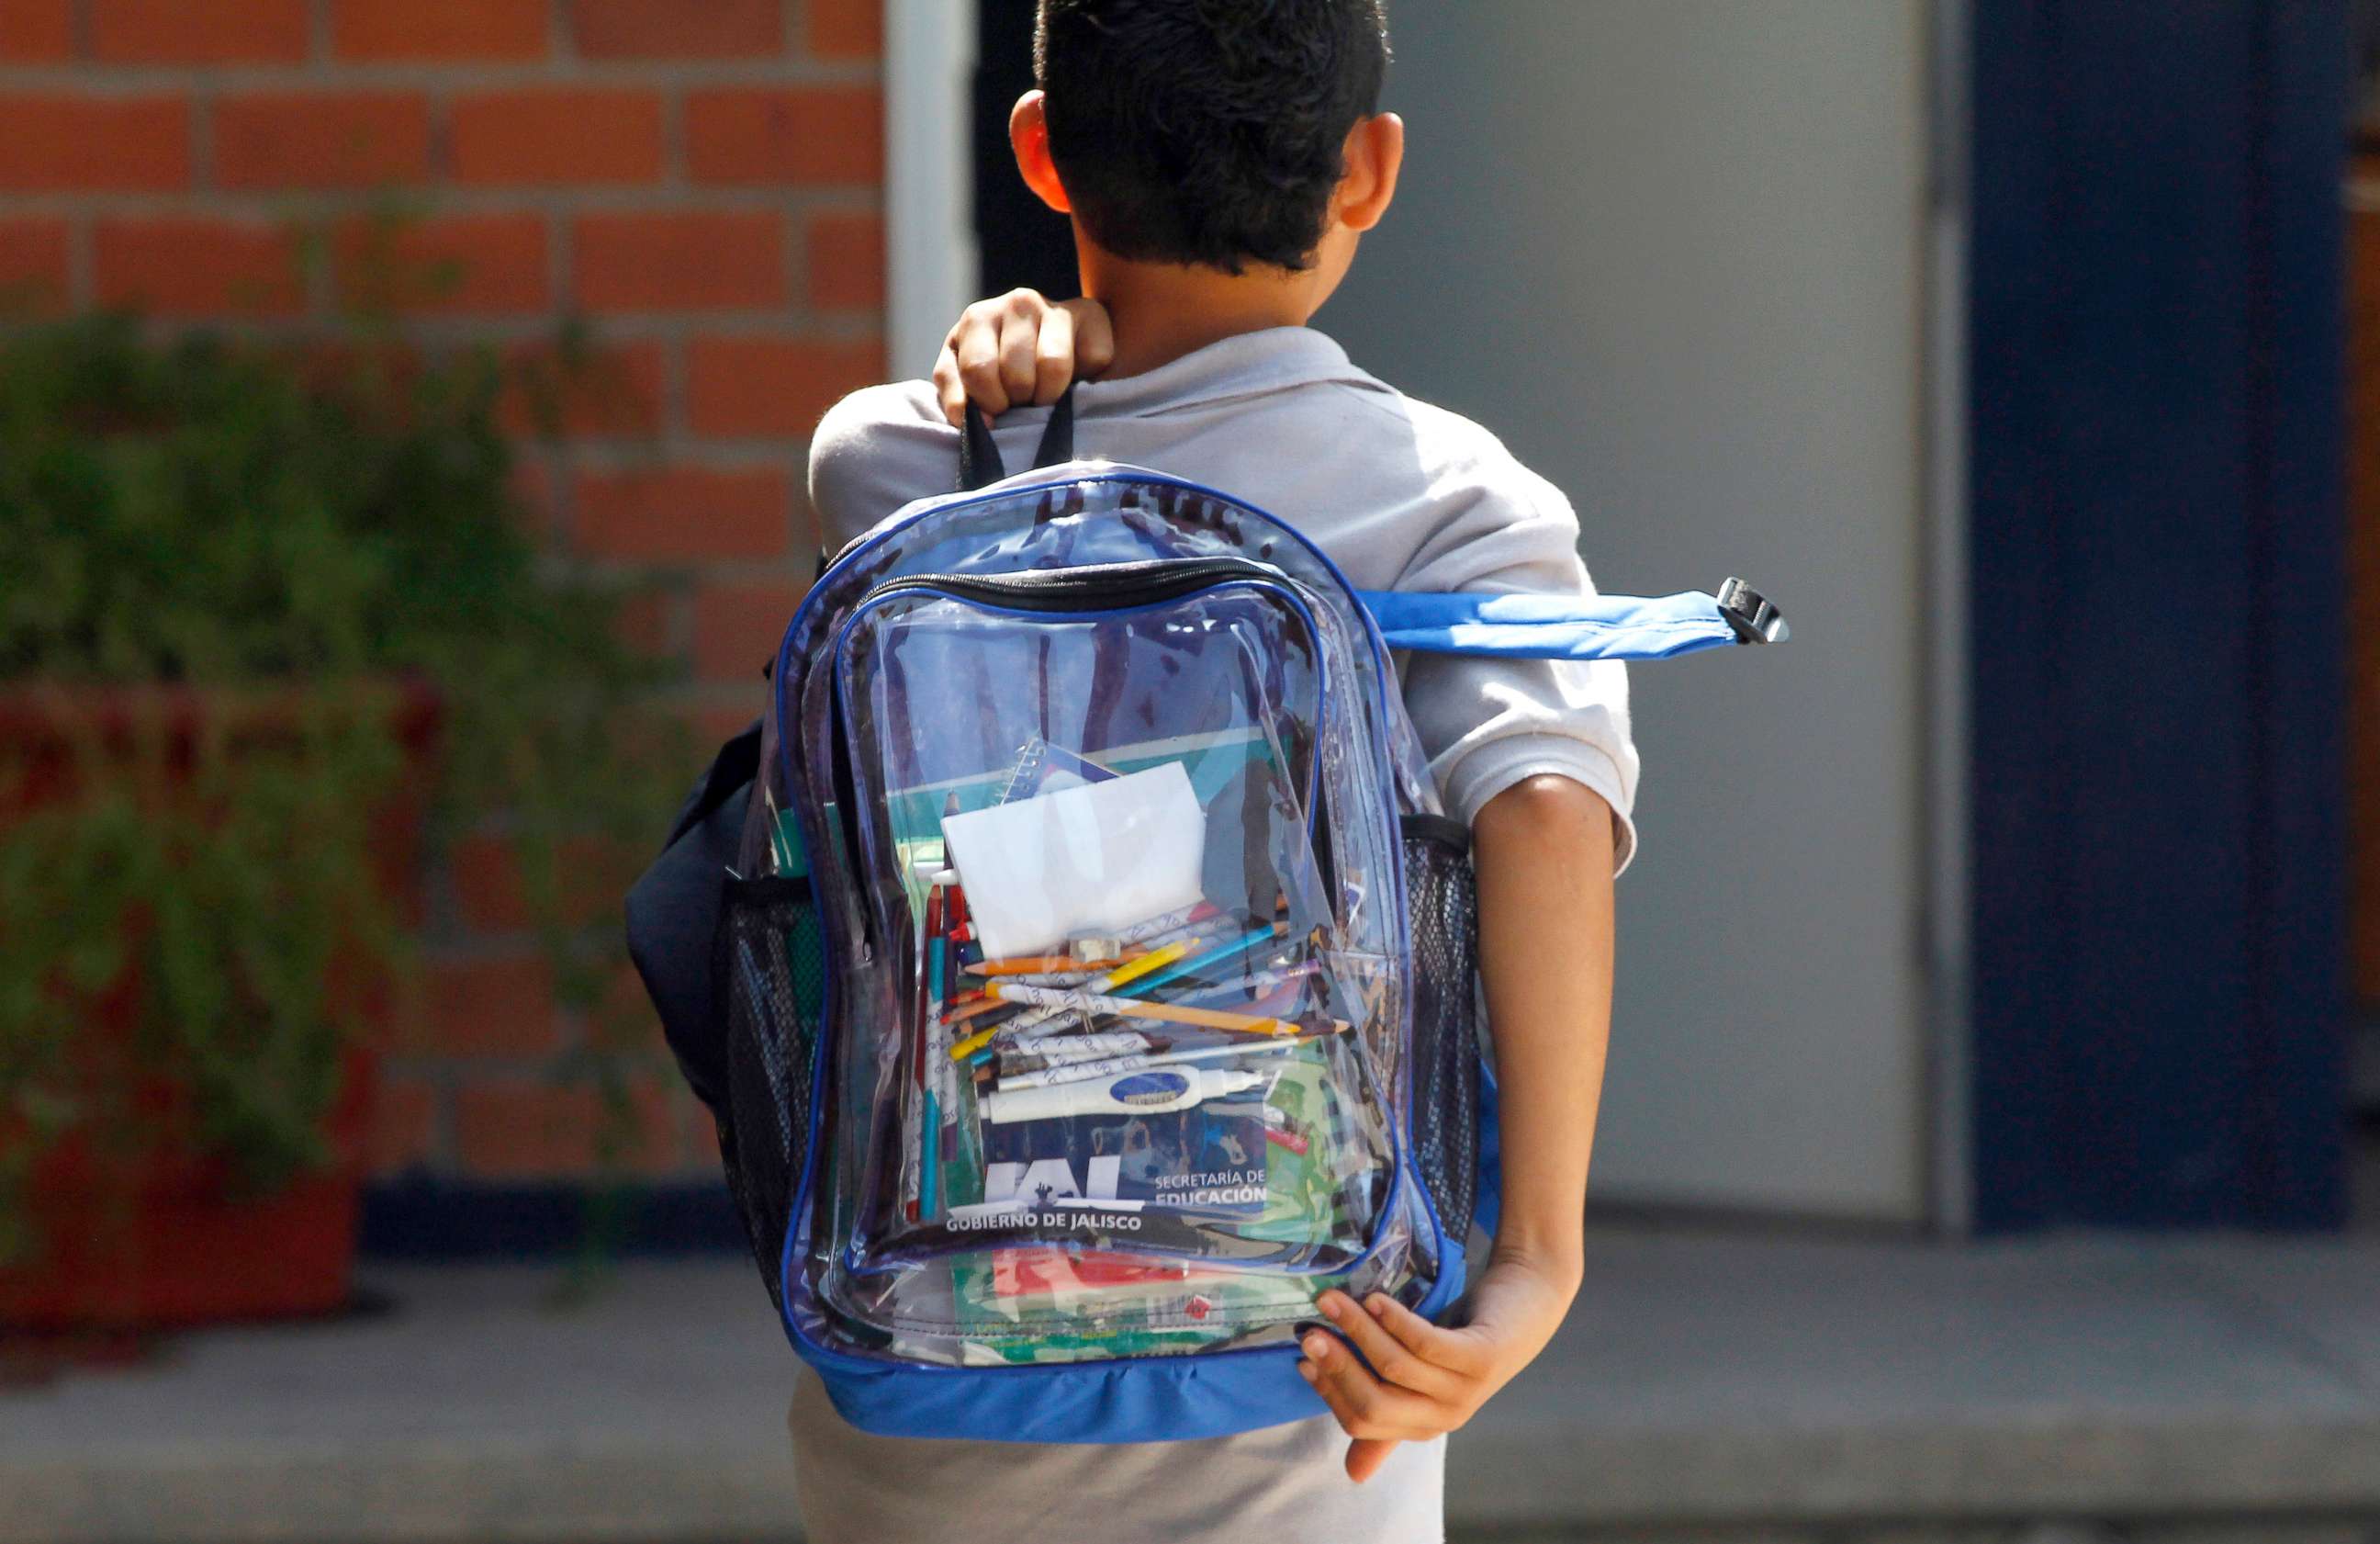 PHOTO: A school student carries a transparent backpack.